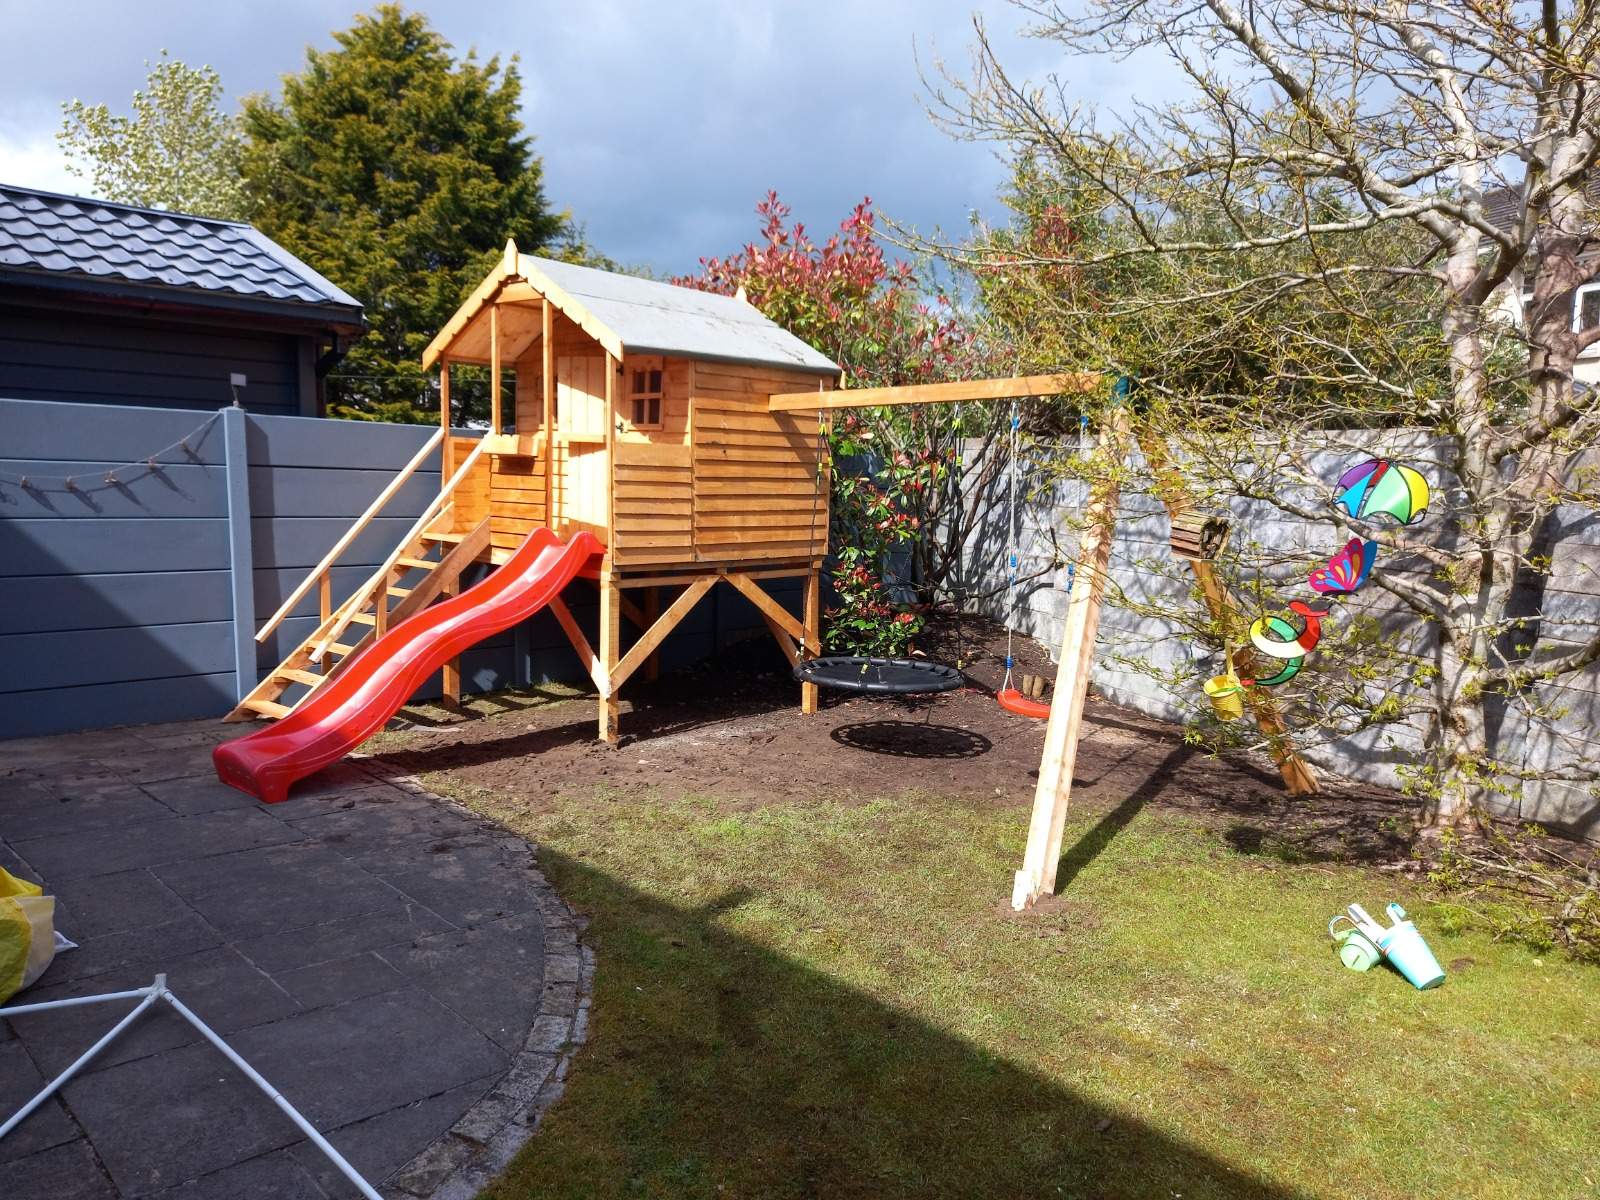 Standard 6x6 With Slide and 1 Swing + Round Birds Nest Swing